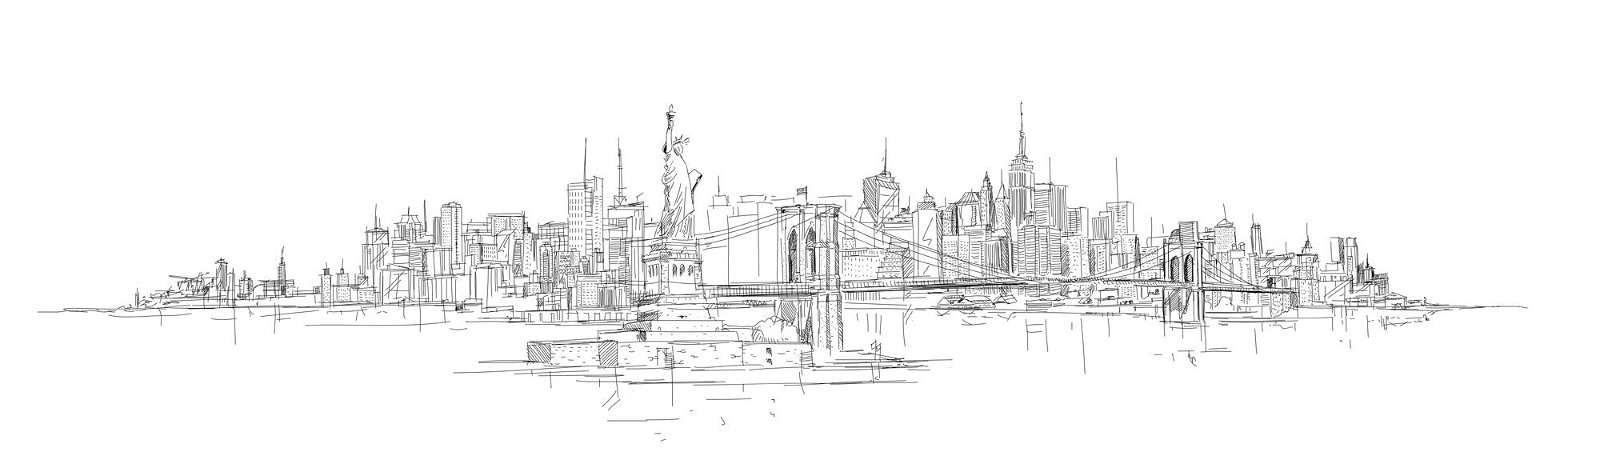 a black and white drawing of a city skyline.